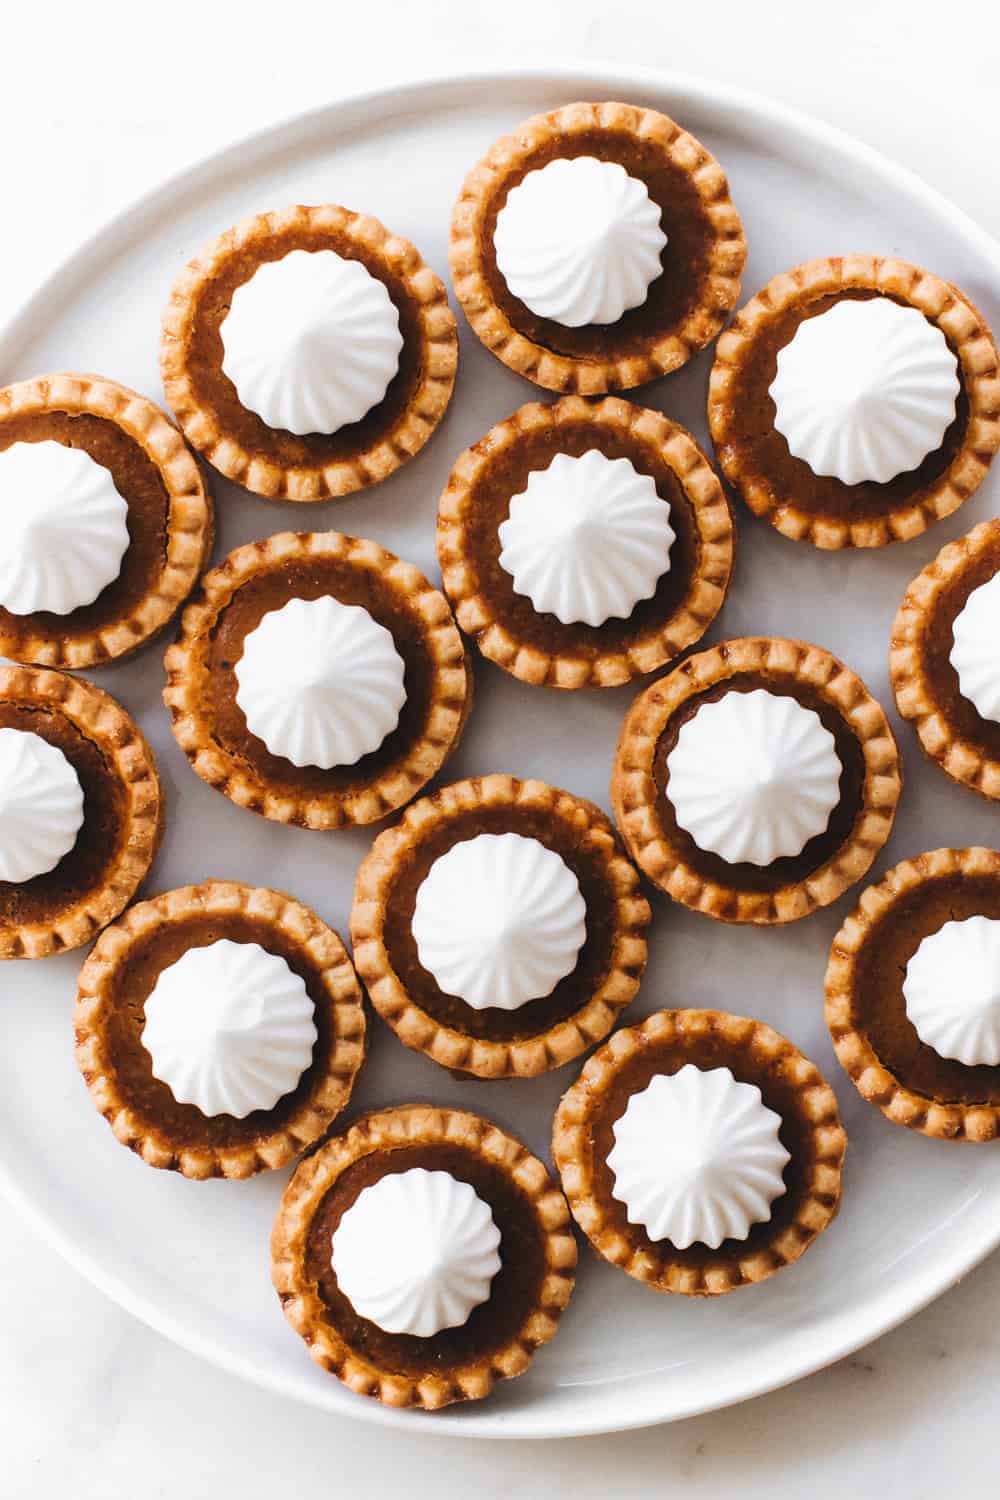 Mini Pumpkin Pies couldn't be more perfect for the holidays! They're simple and totally delish!